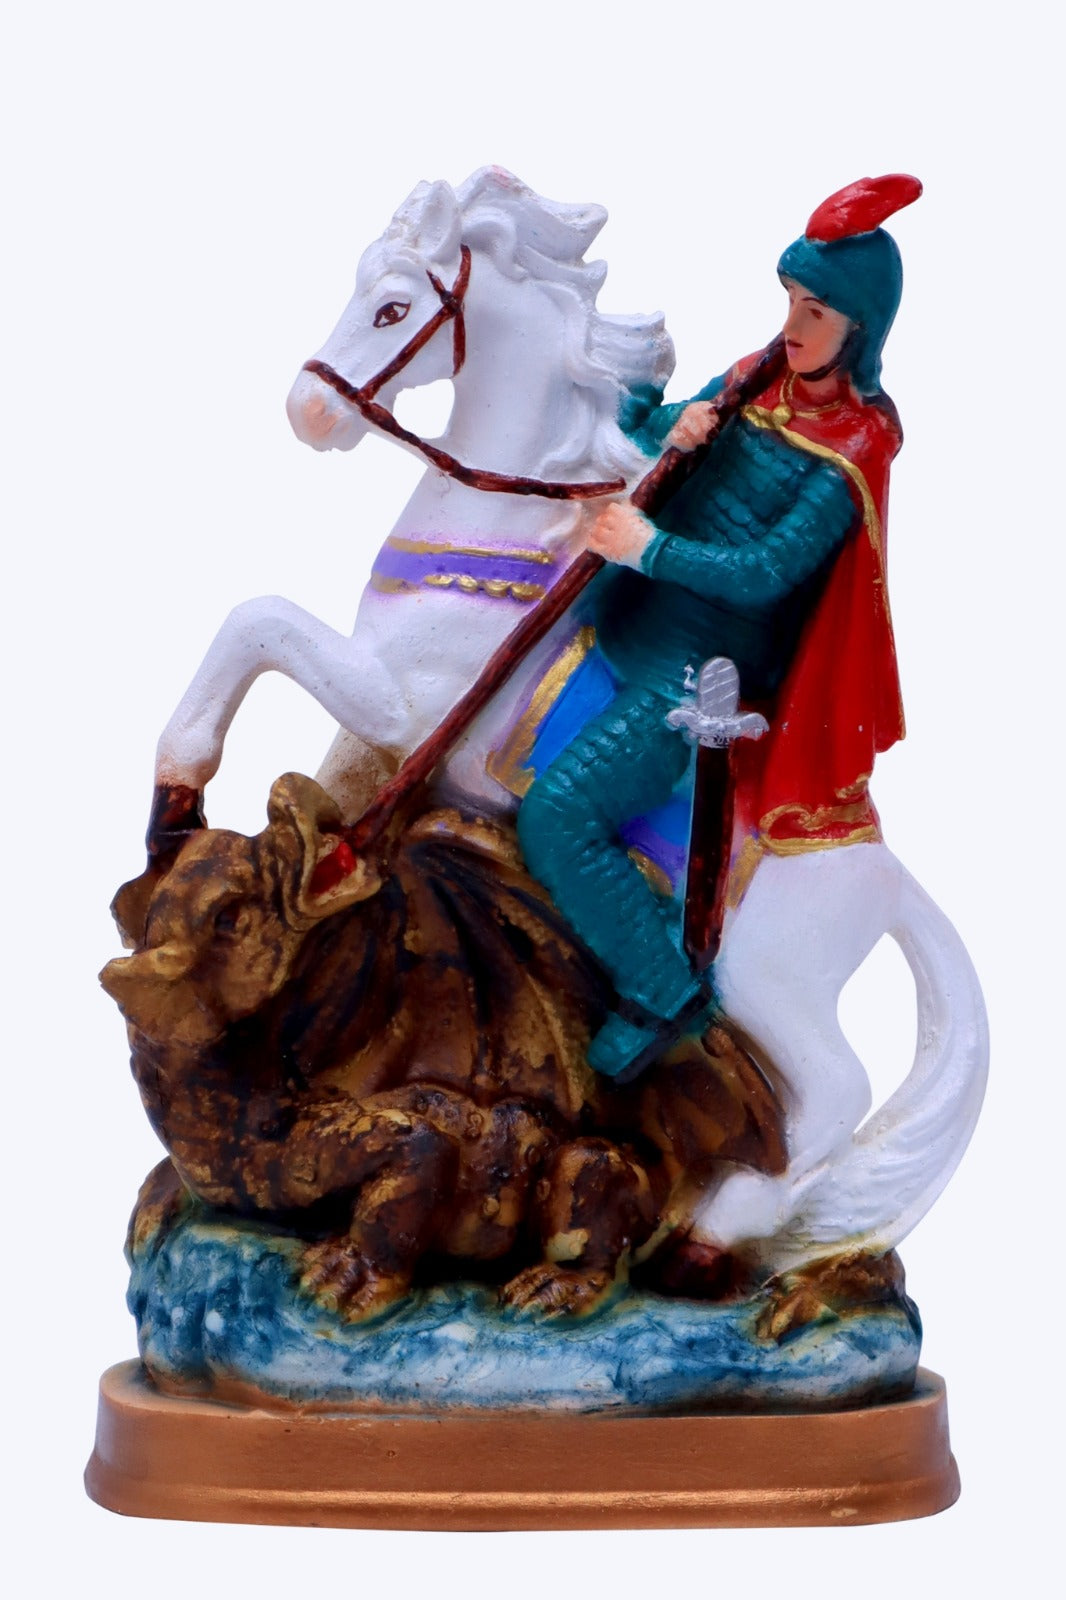 St. George 9 Inch Statues - Exquisite Religious Figures | Living Words